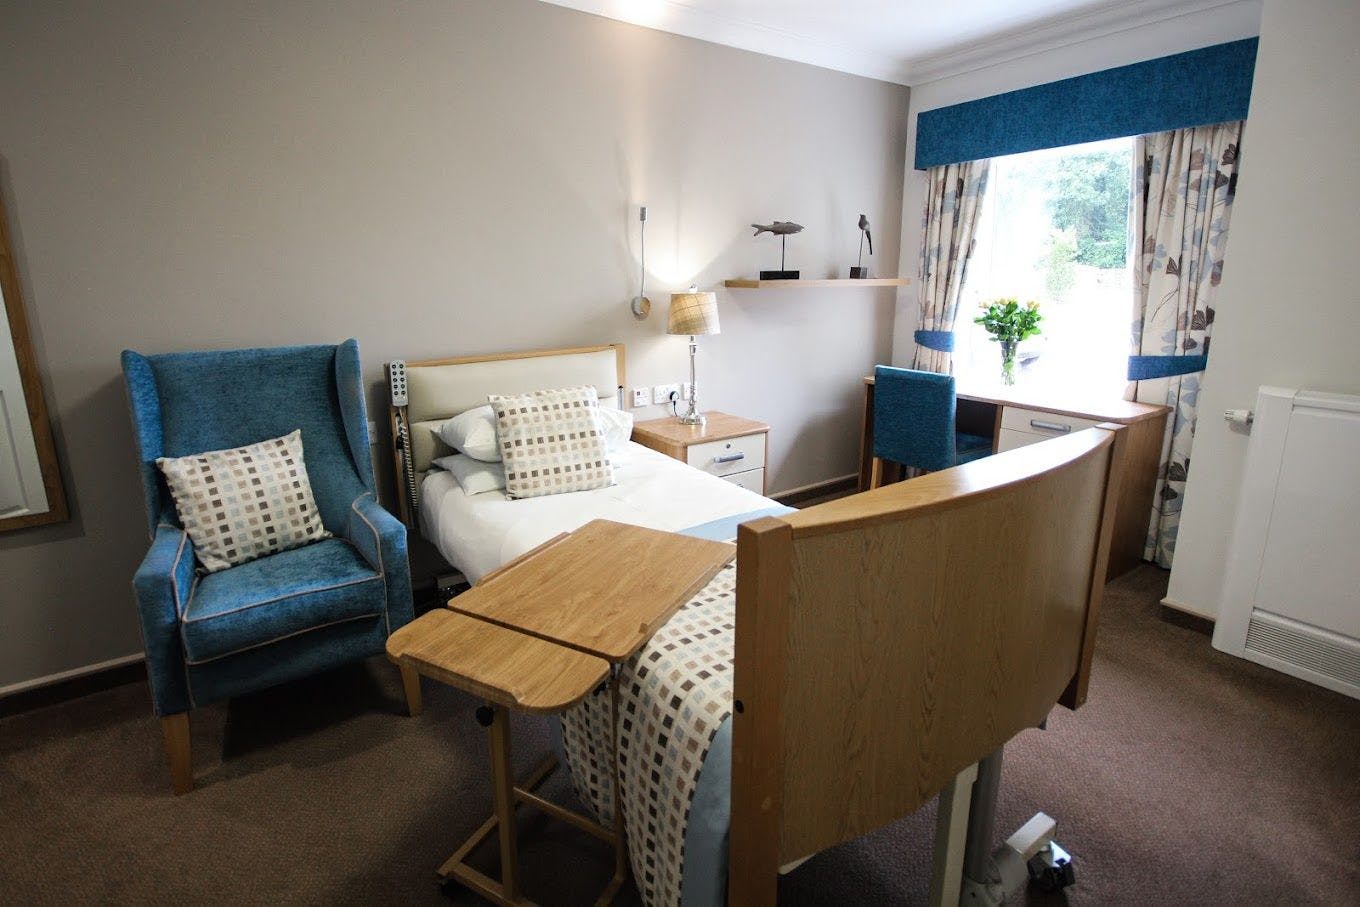 Bedroom of The Moors care home in Ripon, Yorkshire